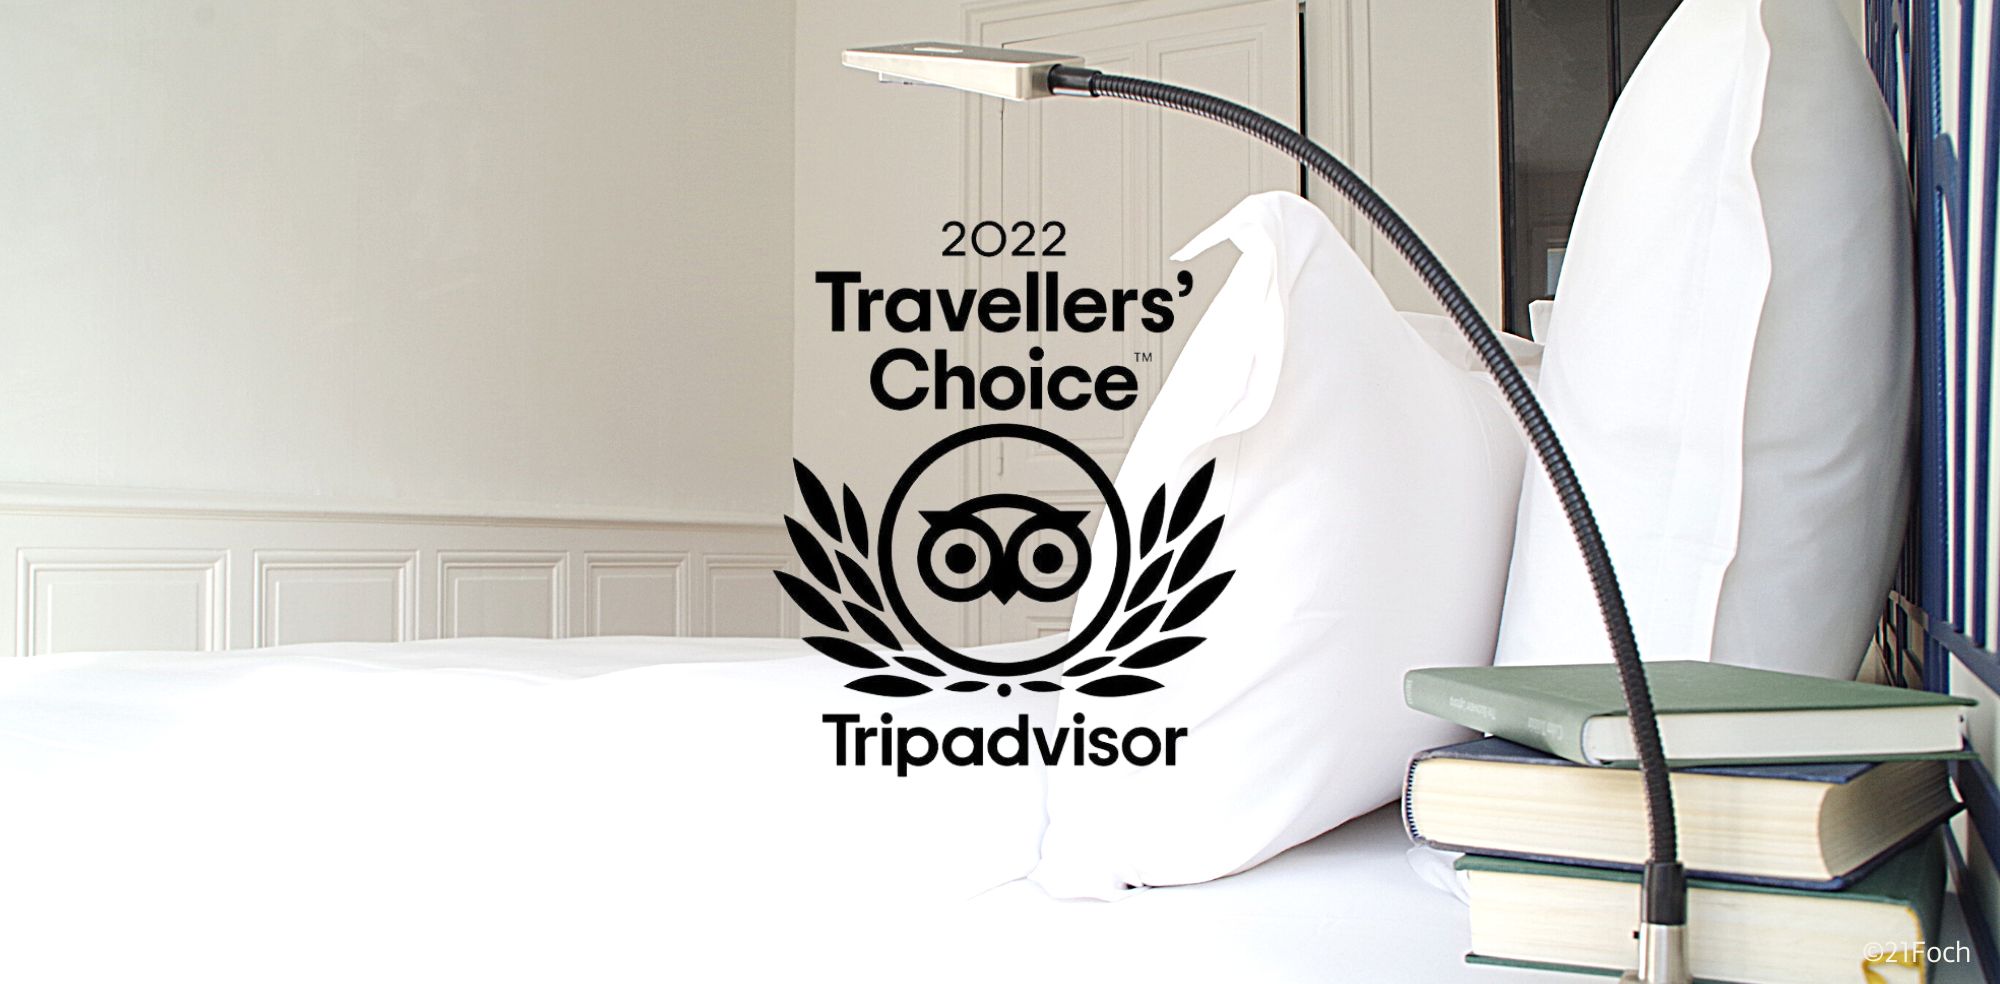 Still number 1 on TripAdvisor for 9 years<br/><a href='https://blog.21foch.fr/blog-le-blog-du-21-foch-toujours-n-1-sur-tripadvisor.asp' title='' target='_blank'>I WANT TO KNOW MORE ABOUT...</a>